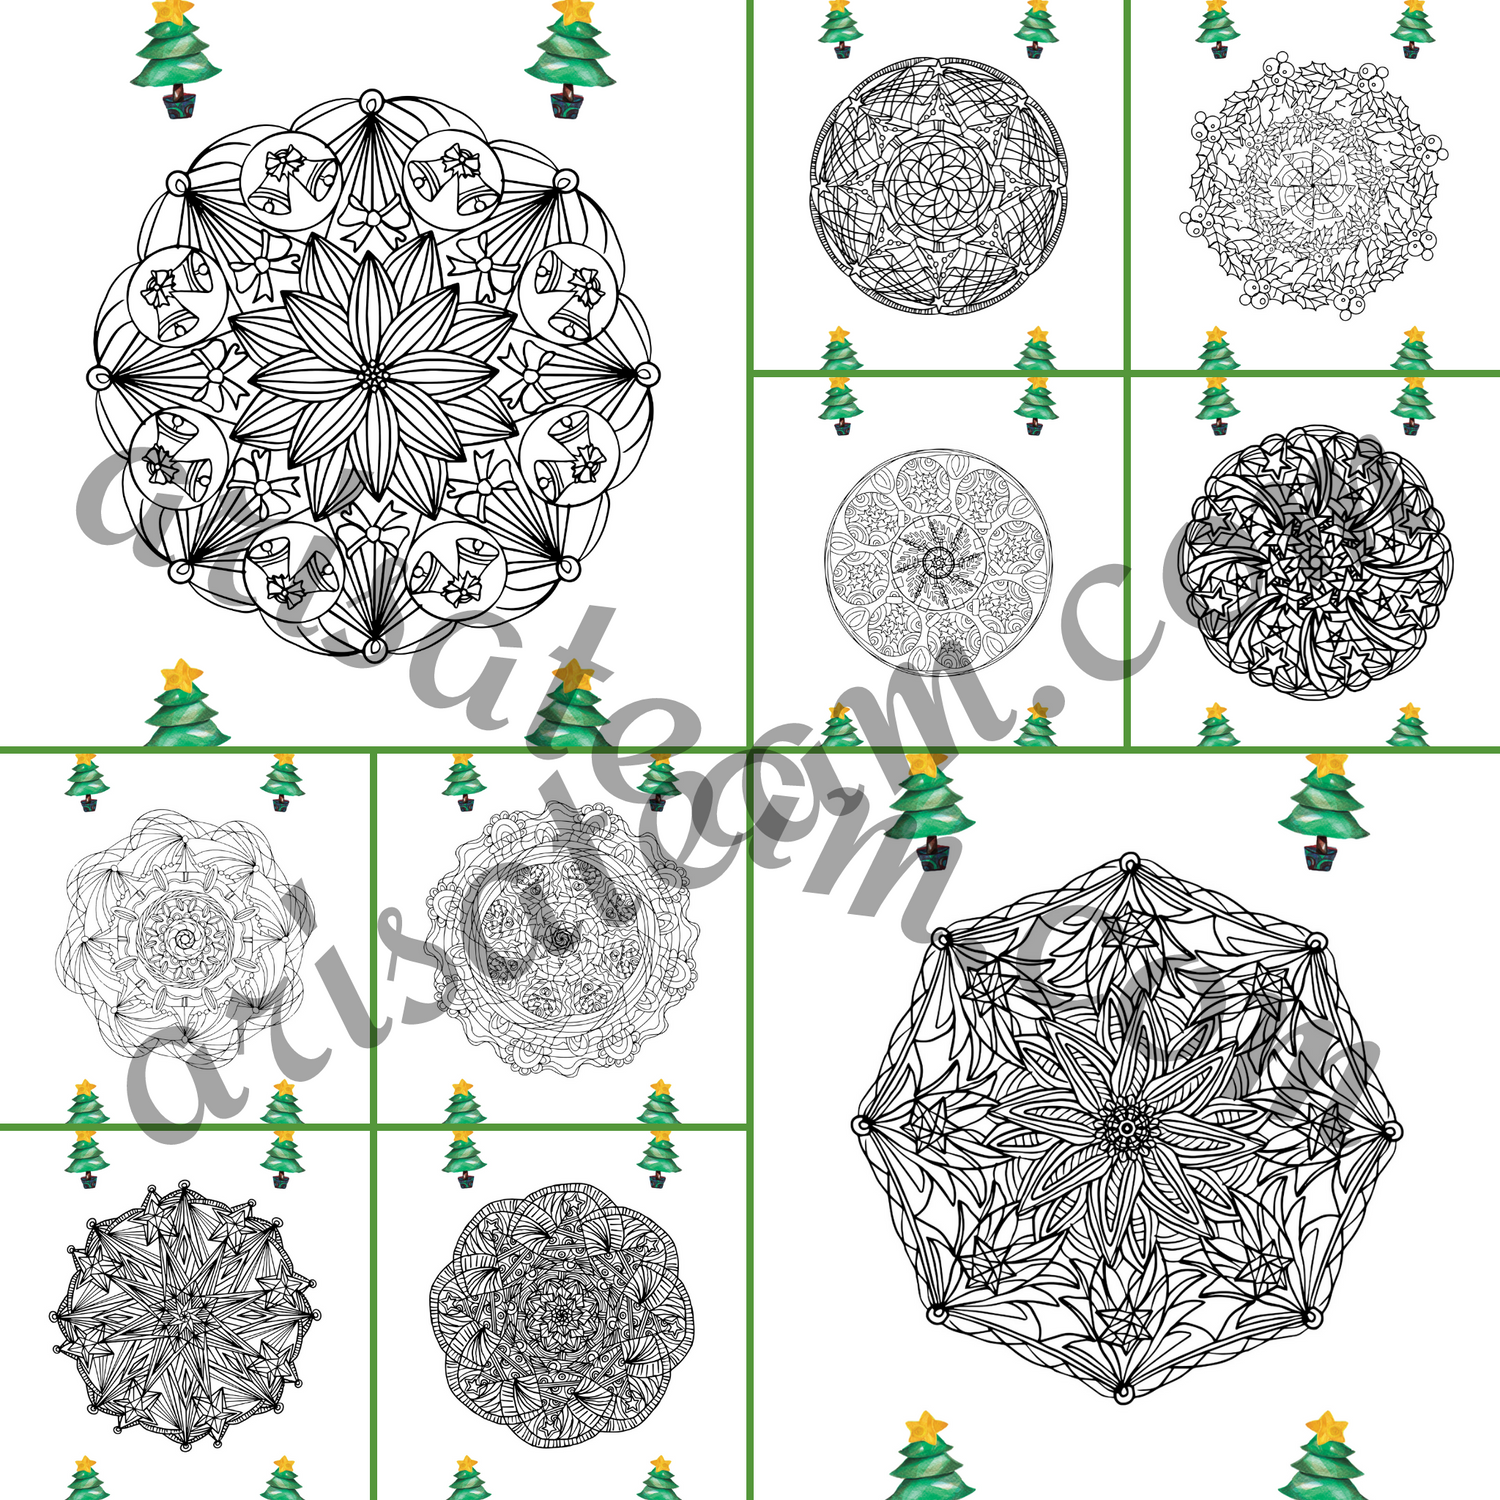 The mandalas of the Christmas Delight Mandala Coloring Pages Pack-8.5x11 by ArisaTeam at a glance